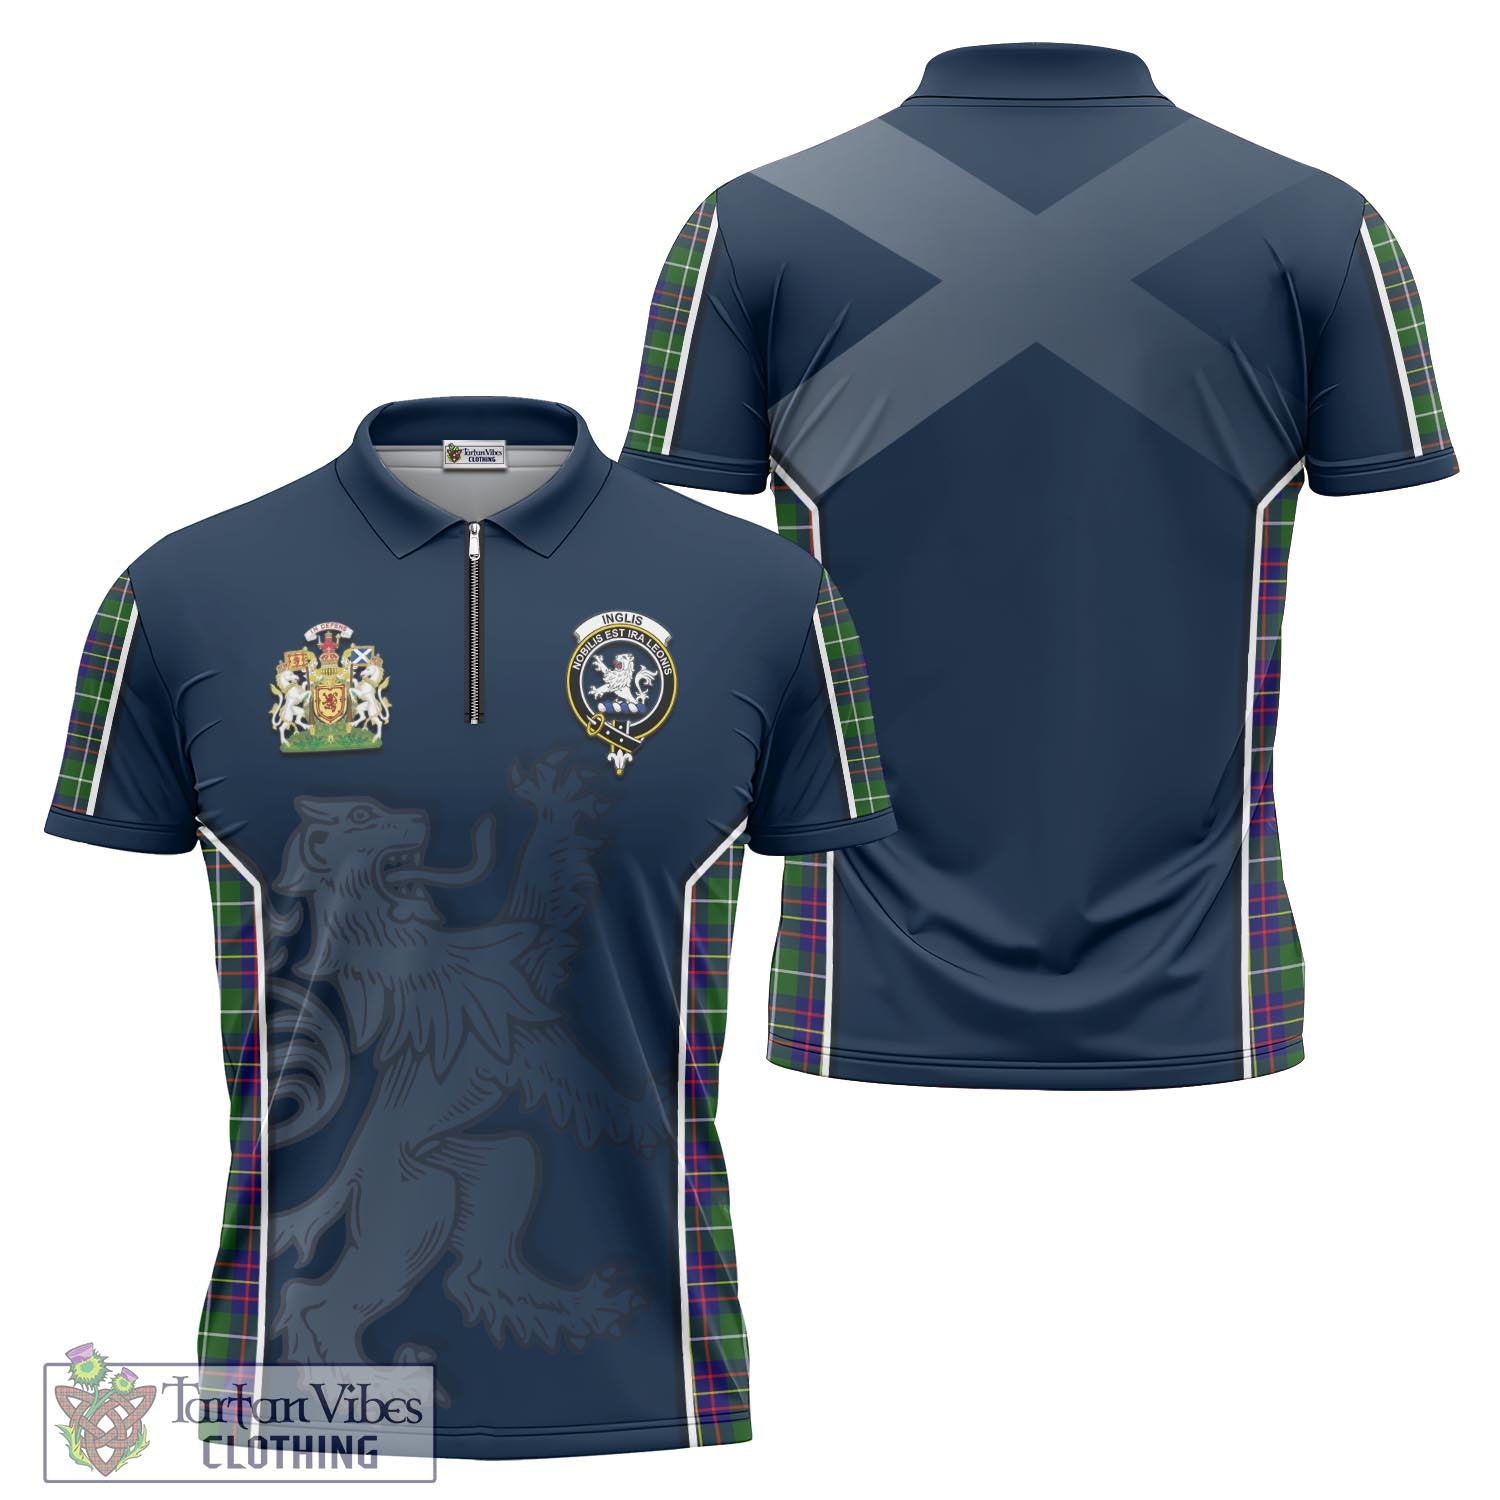 Tartan Vibes Clothing Inglis Modern Tartan Zipper Polo Shirt with Family Crest and Lion Rampant Vibes Sport Style